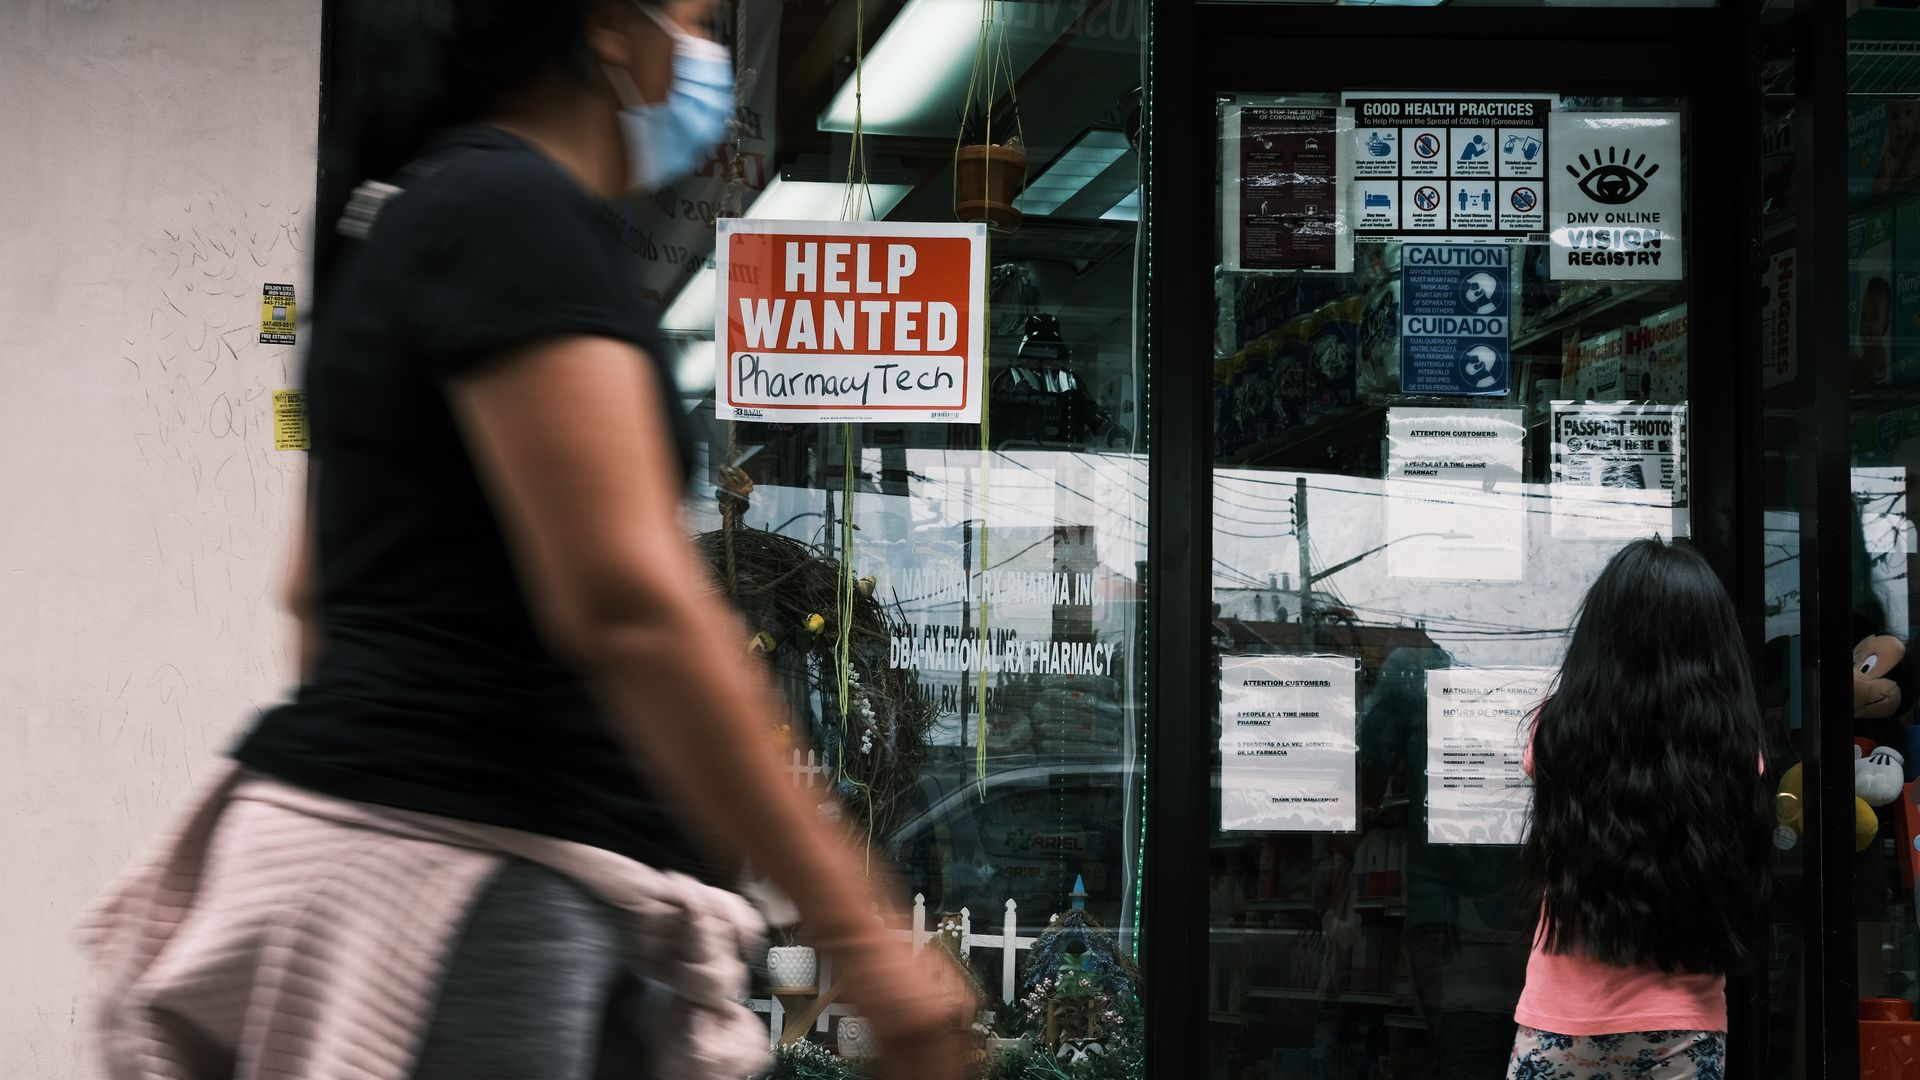 A woman is seen walking by a "Help Wanted" sign in New York City.